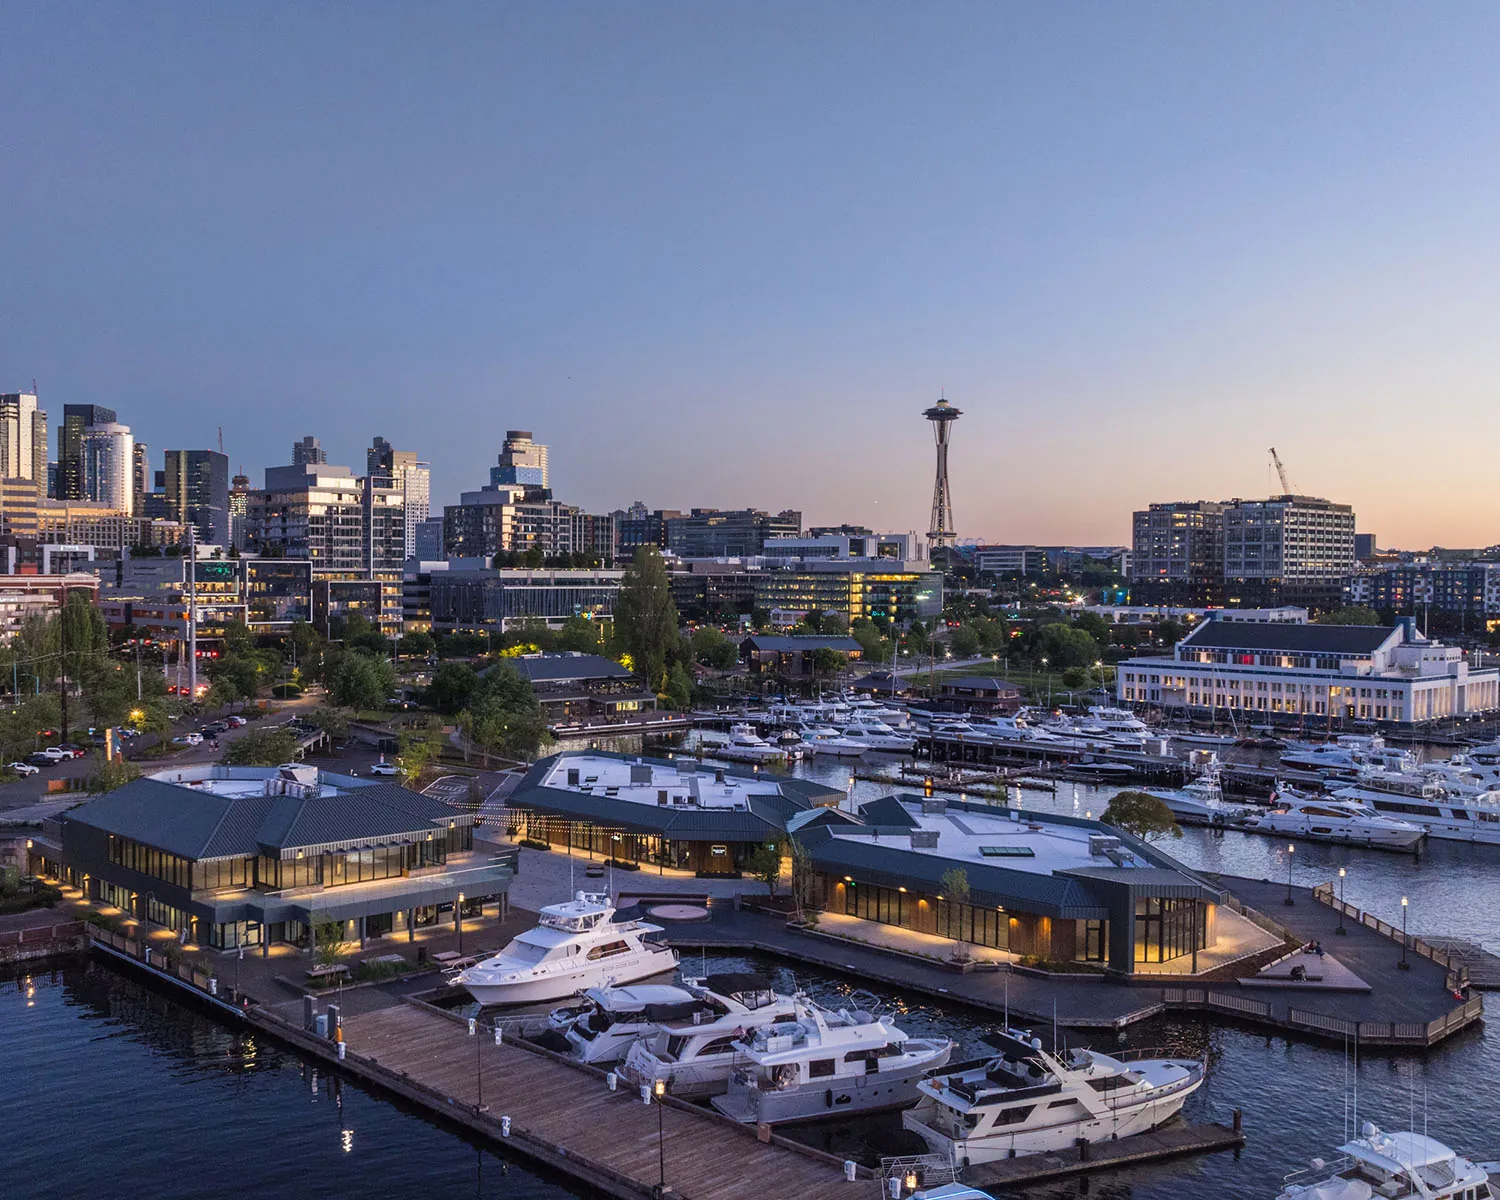 lake union piers and seattle skyline at dusk